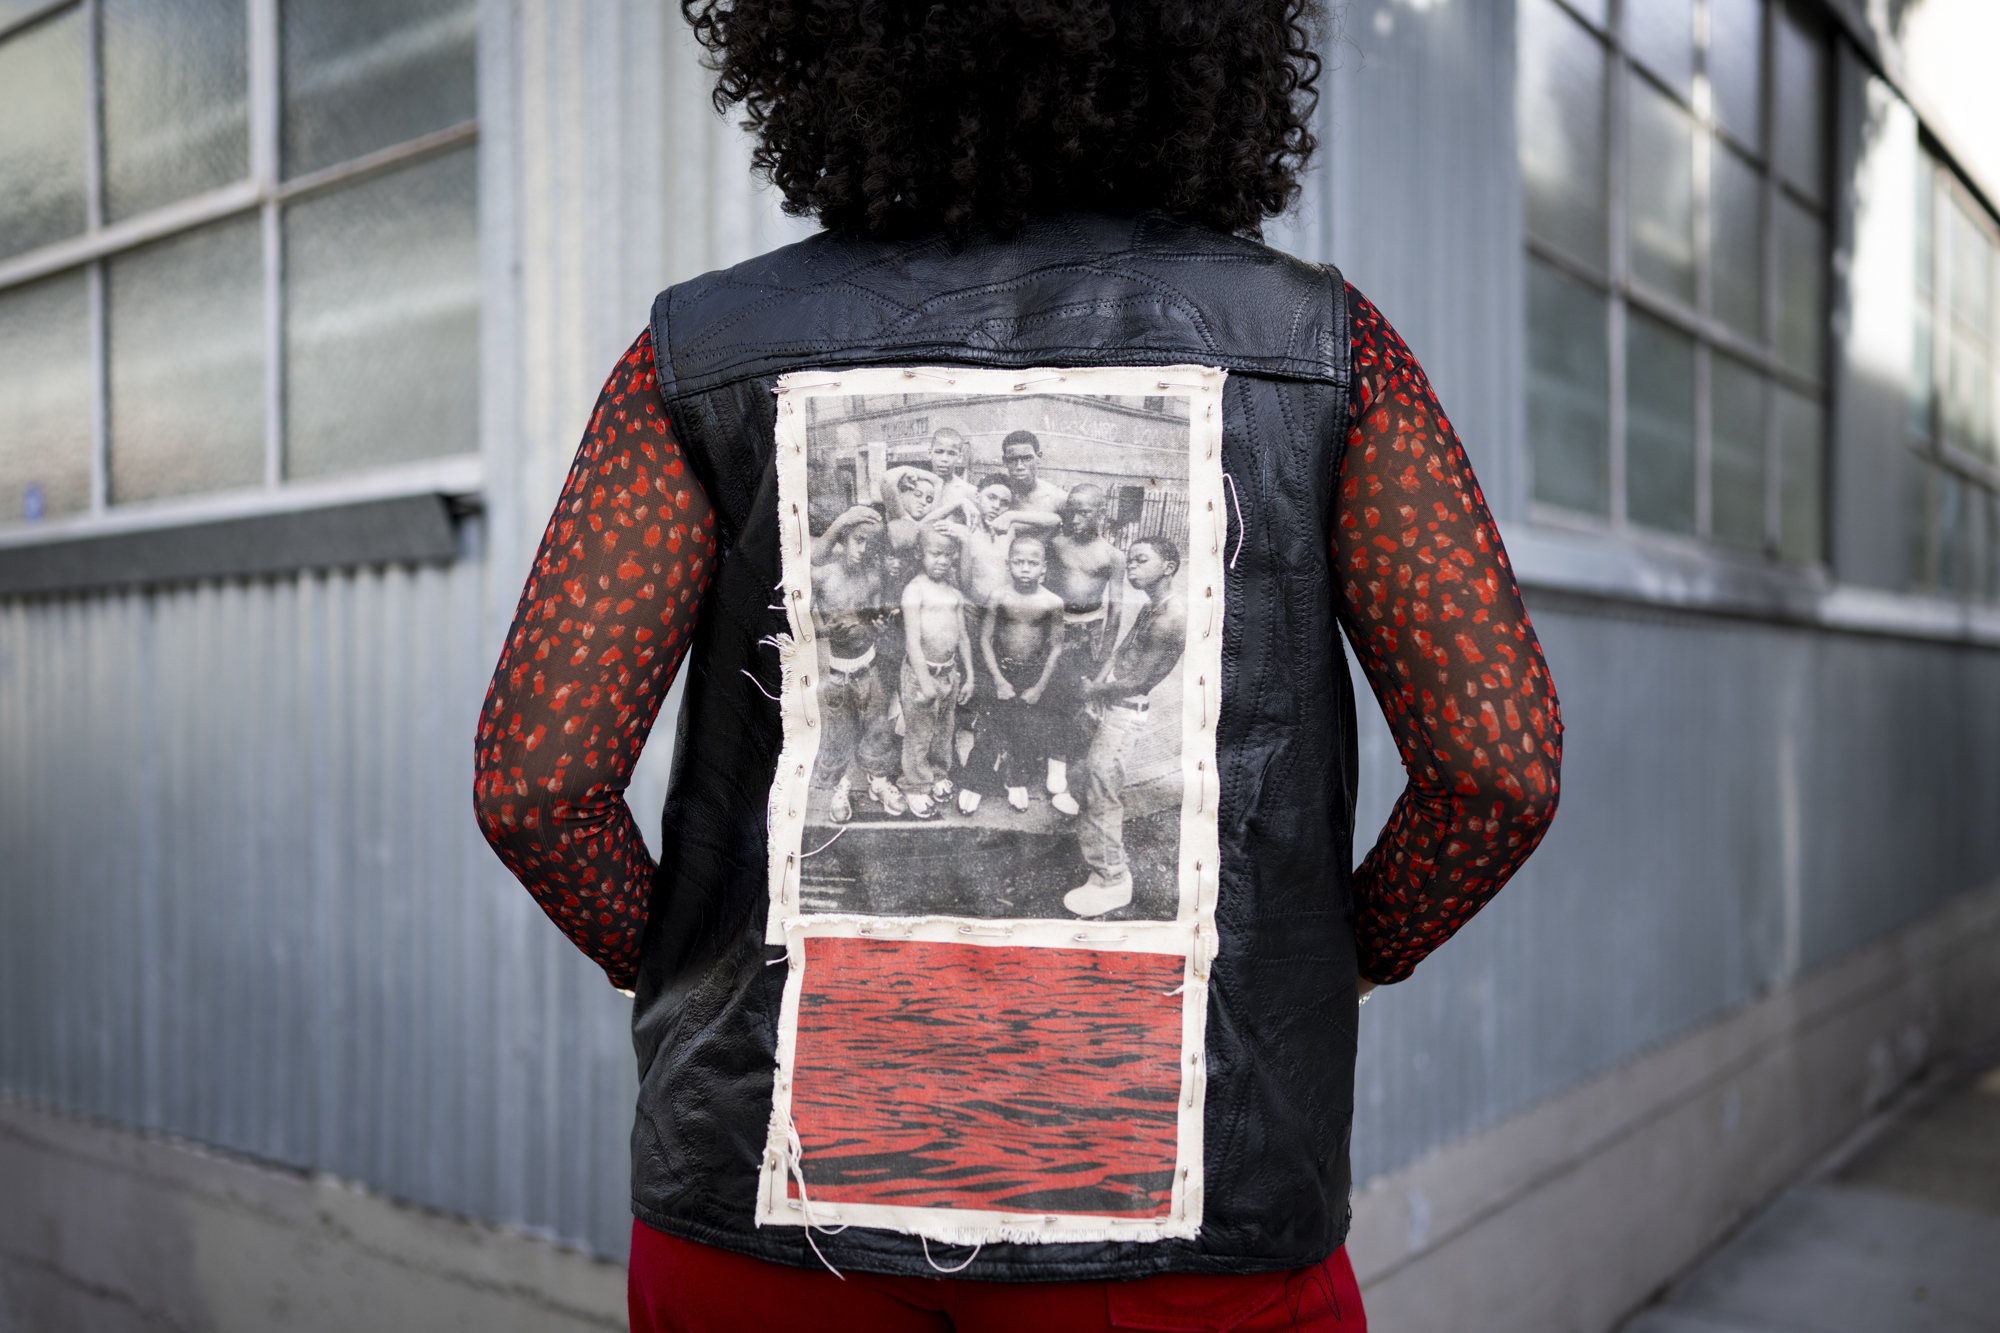 A person long hair poses for a photo with an old photo stitched to the back of their leather vest.